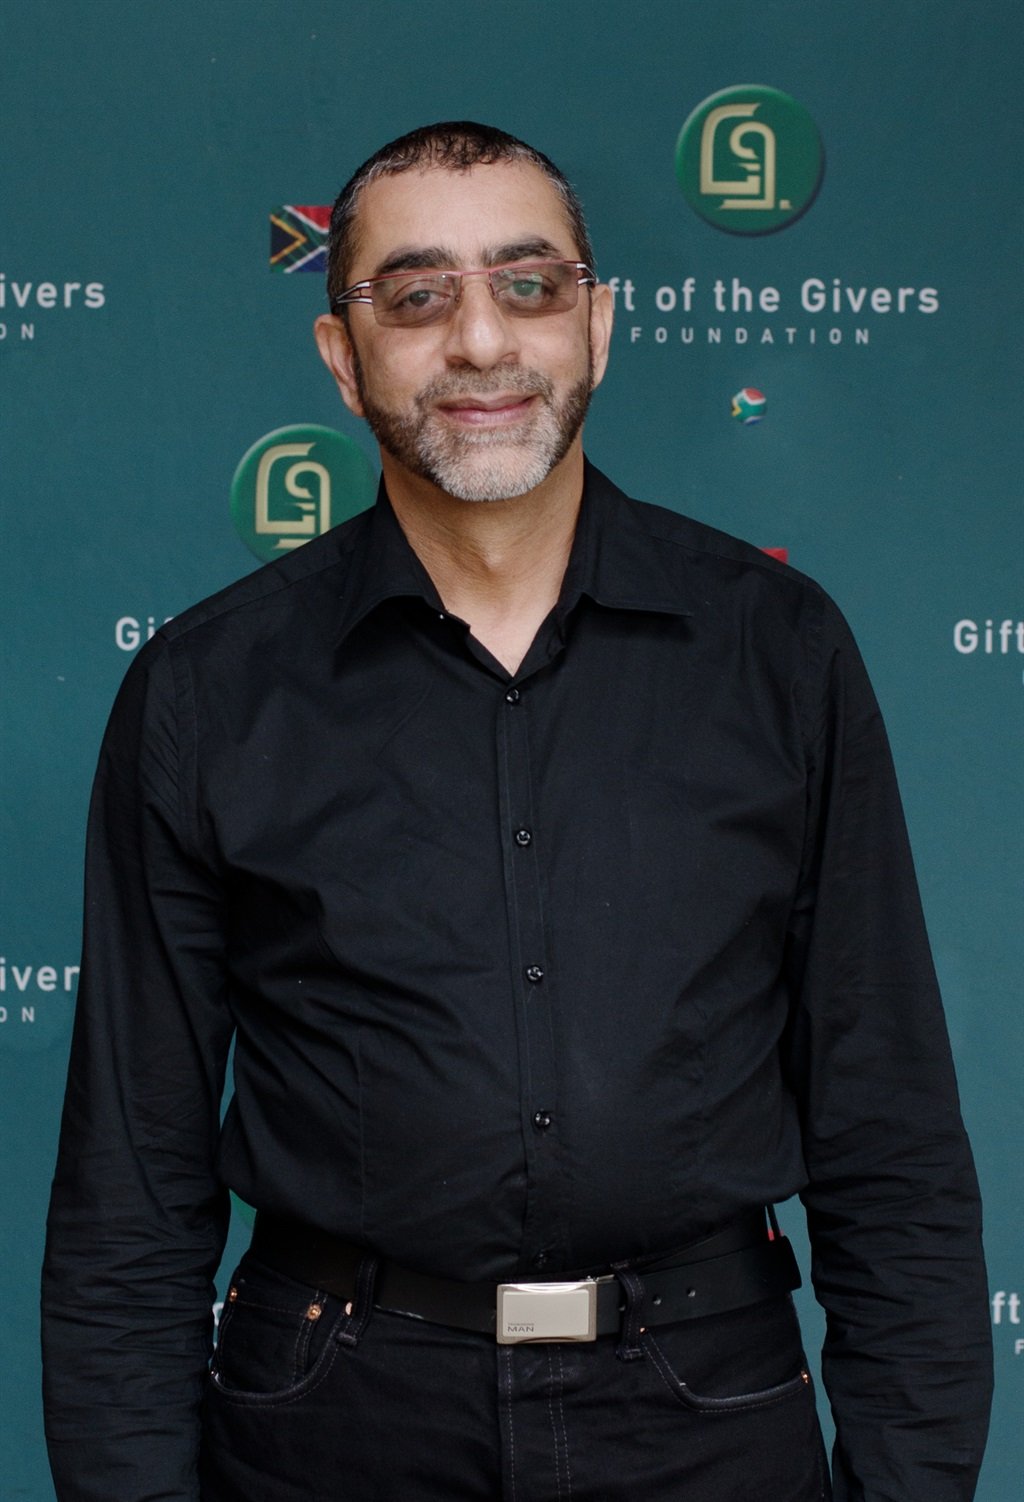 Imtiaz Sooliman says that Gift of the Givers has b